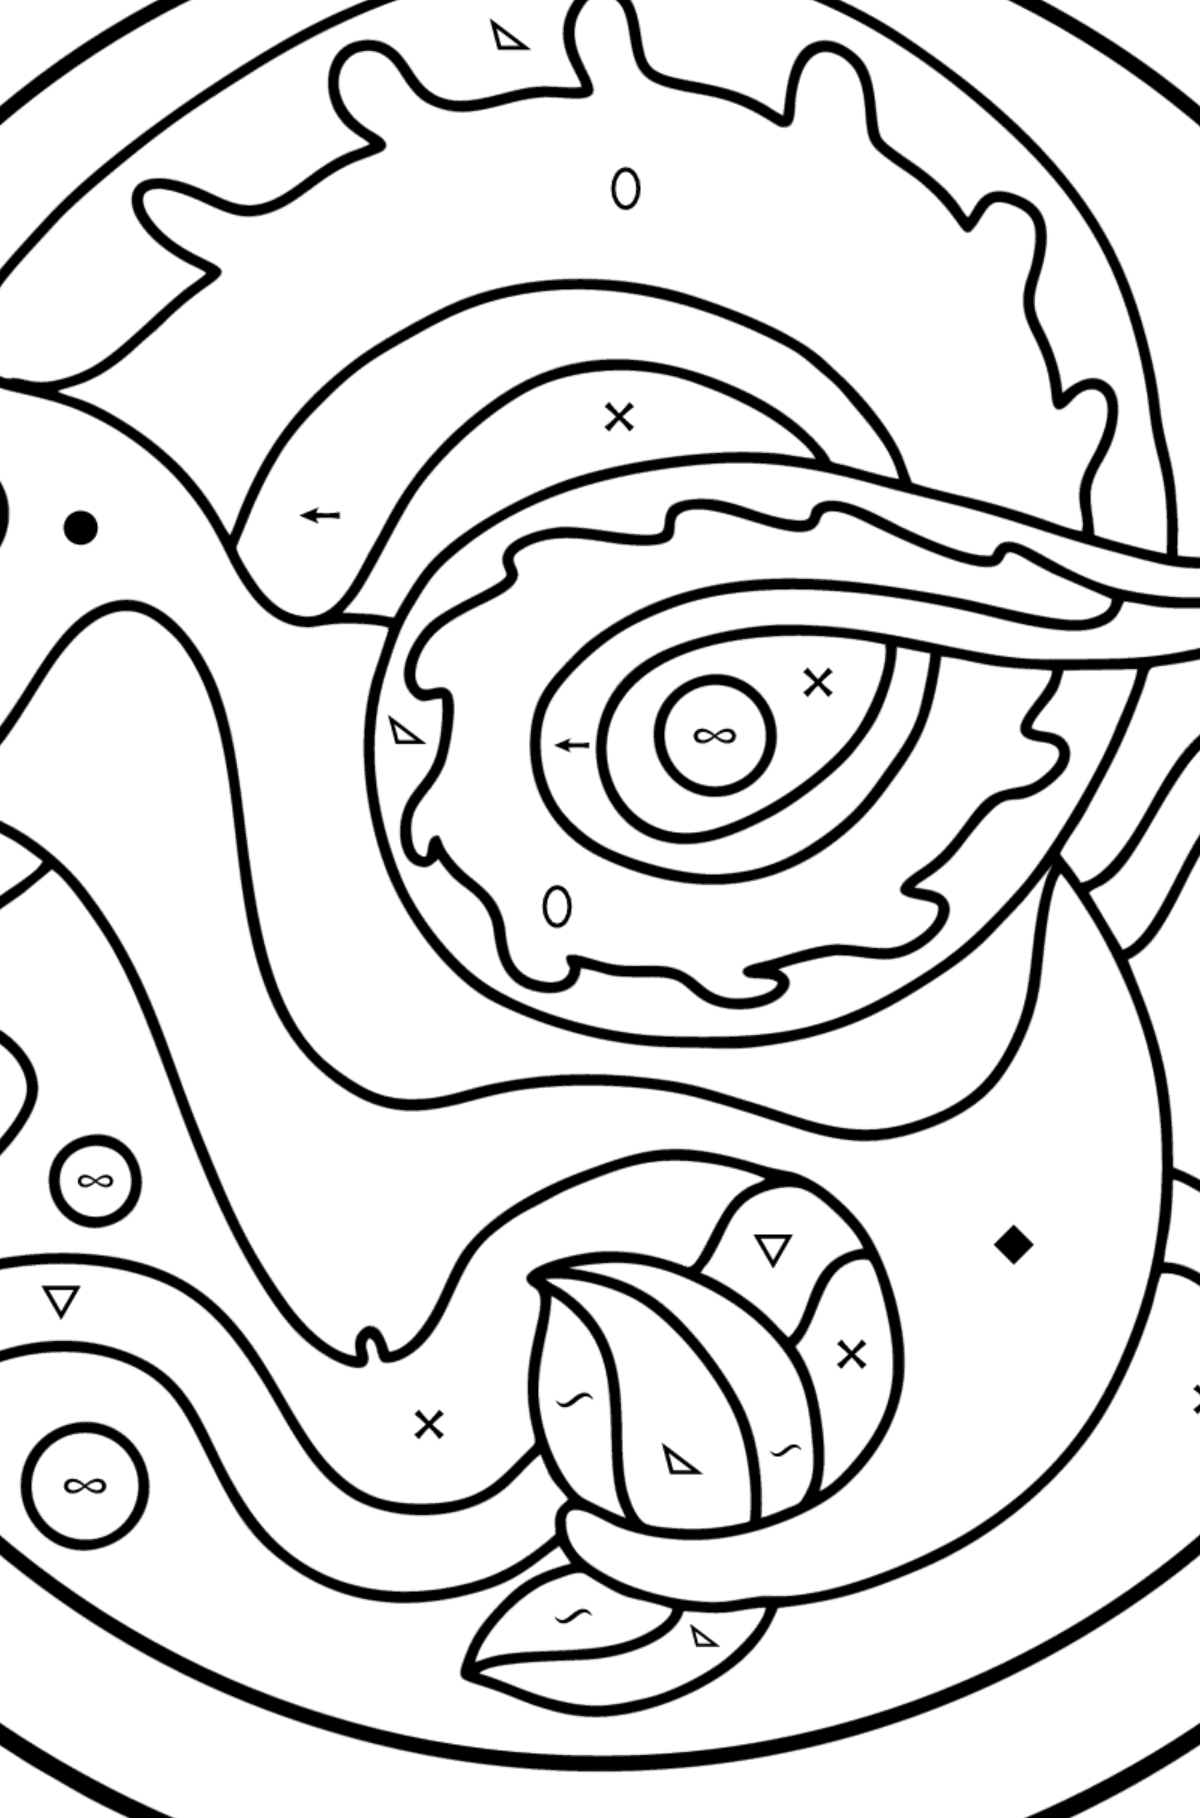 Coloring page for kids - Capricorn zodiac sign - Coloring by Symbols and Geometric Shapes for Kids